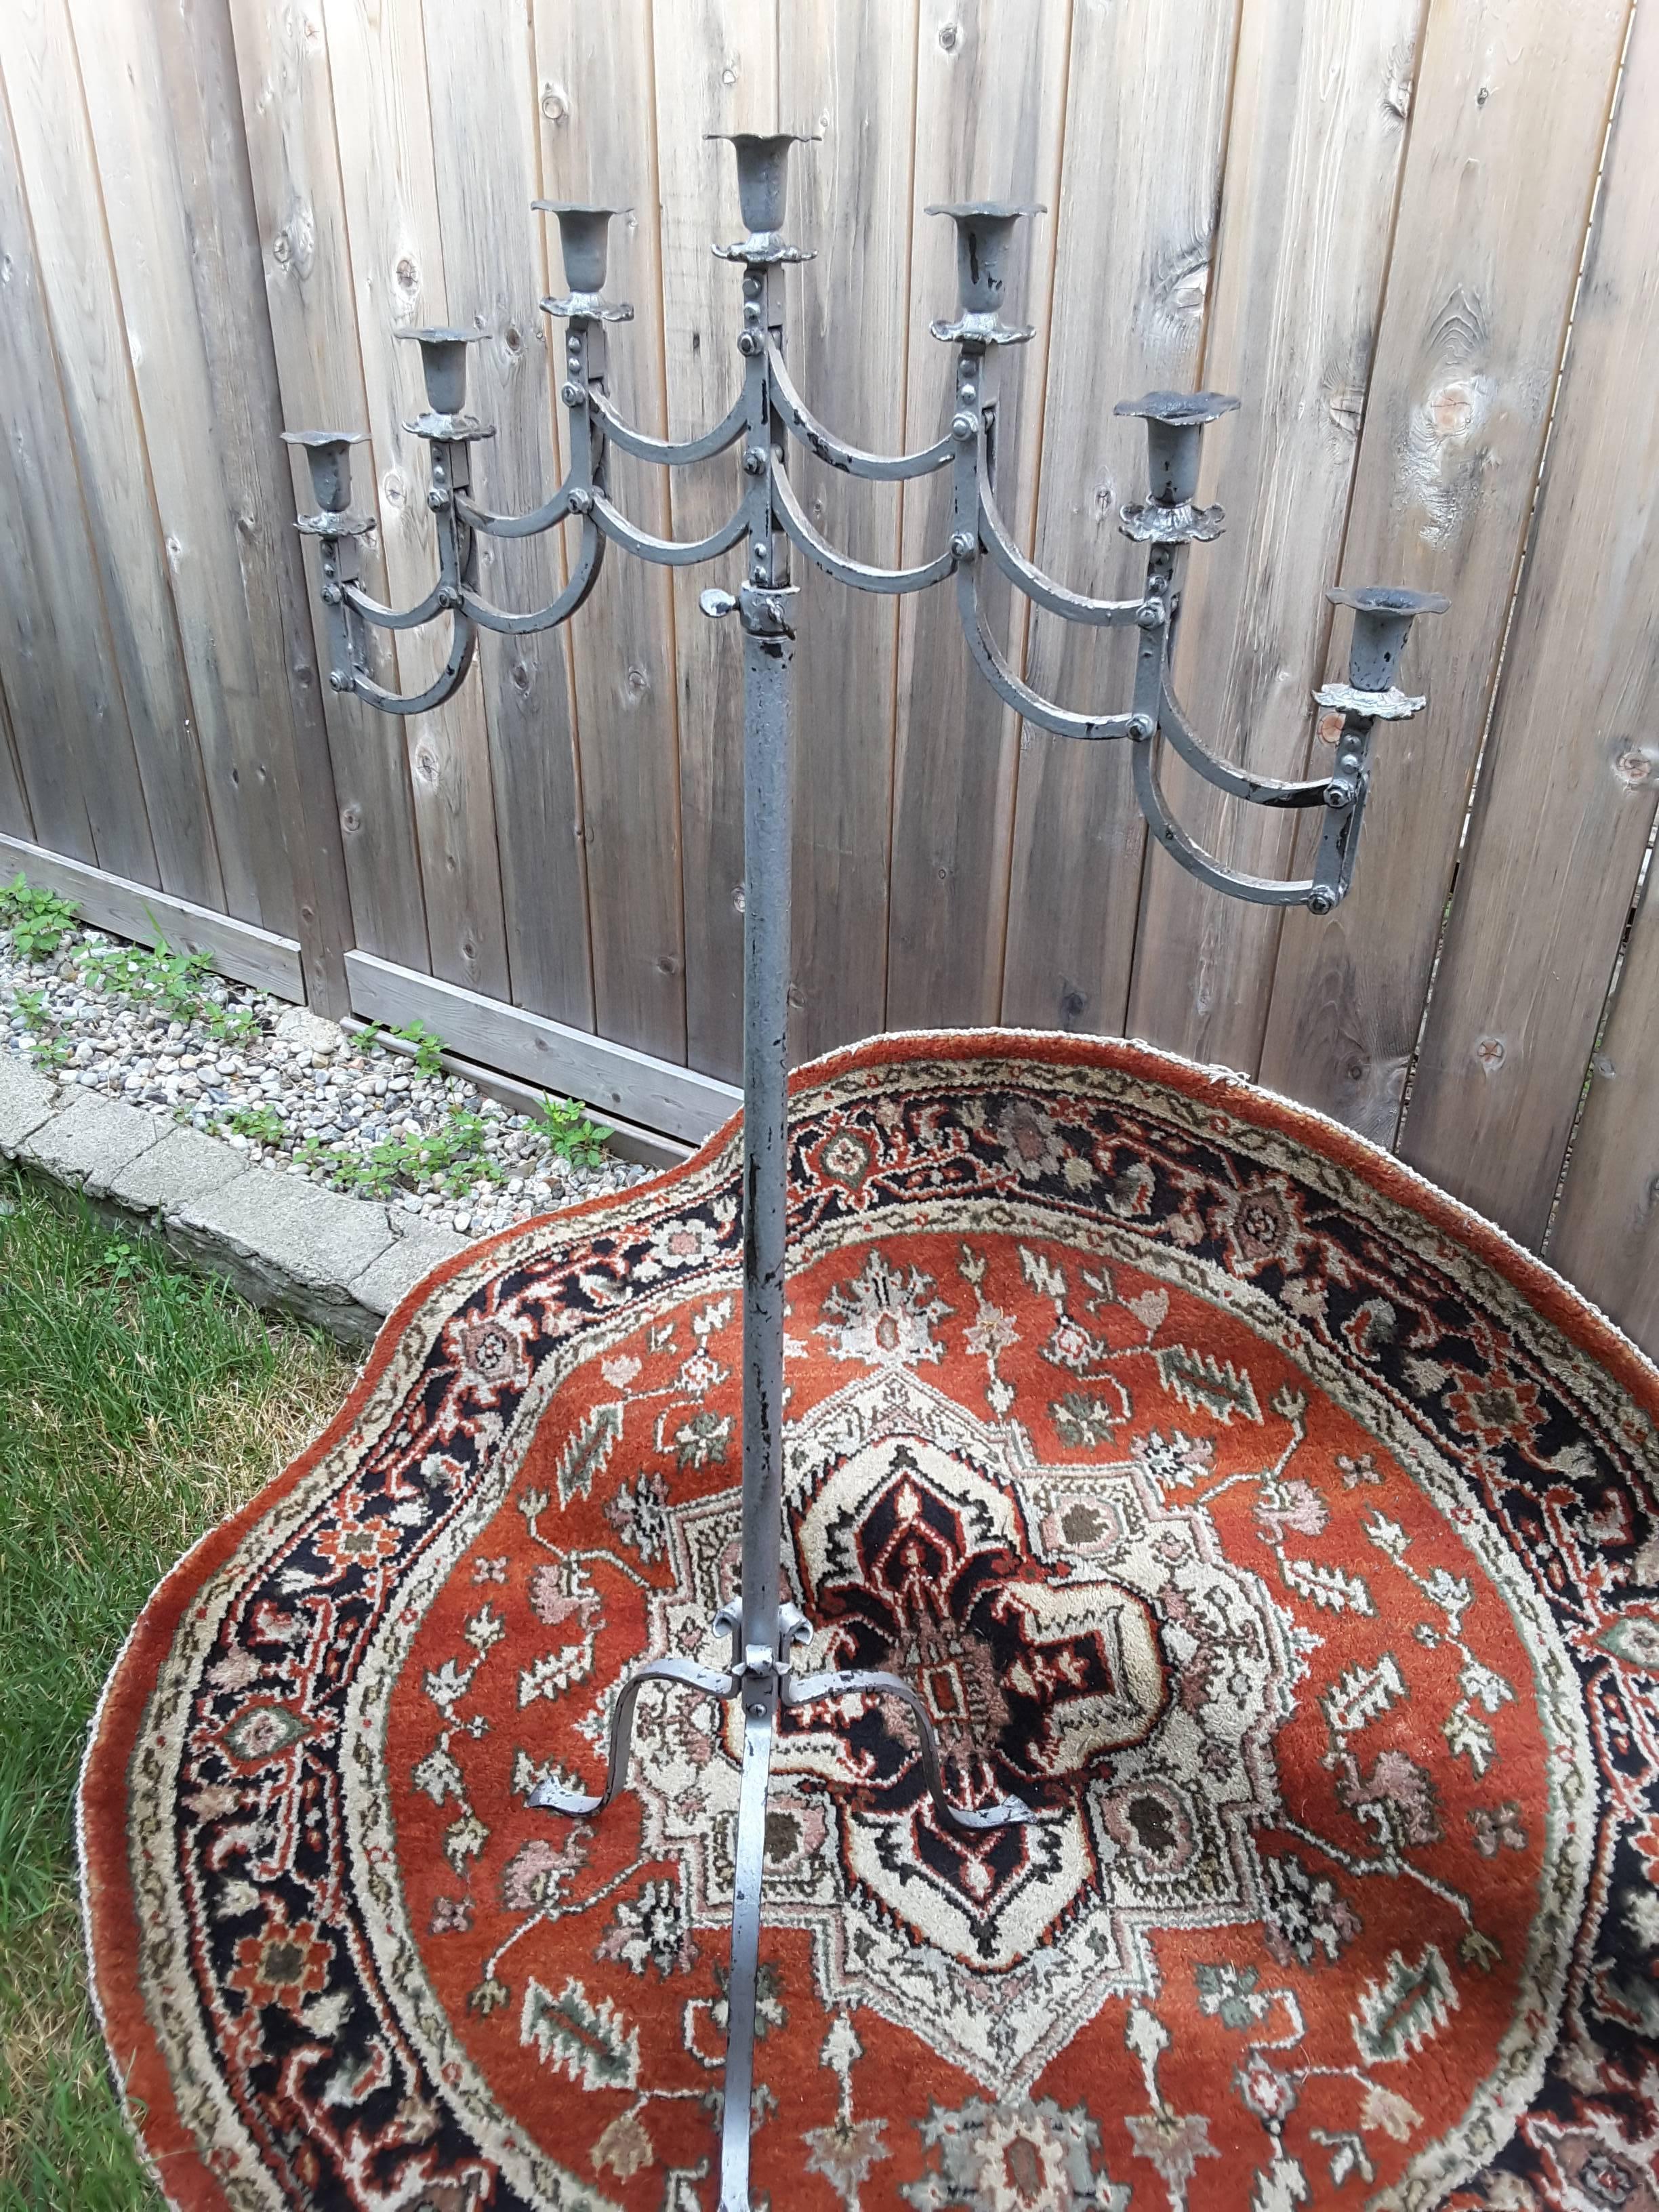 Wrought iron candelabra with adjustable height and articulated seven-arm candle holder, with tulip floral shaped drip cups, on a cabriole style leg and rolled top on center post the candelabra adjusts from center post, the arms move to any position